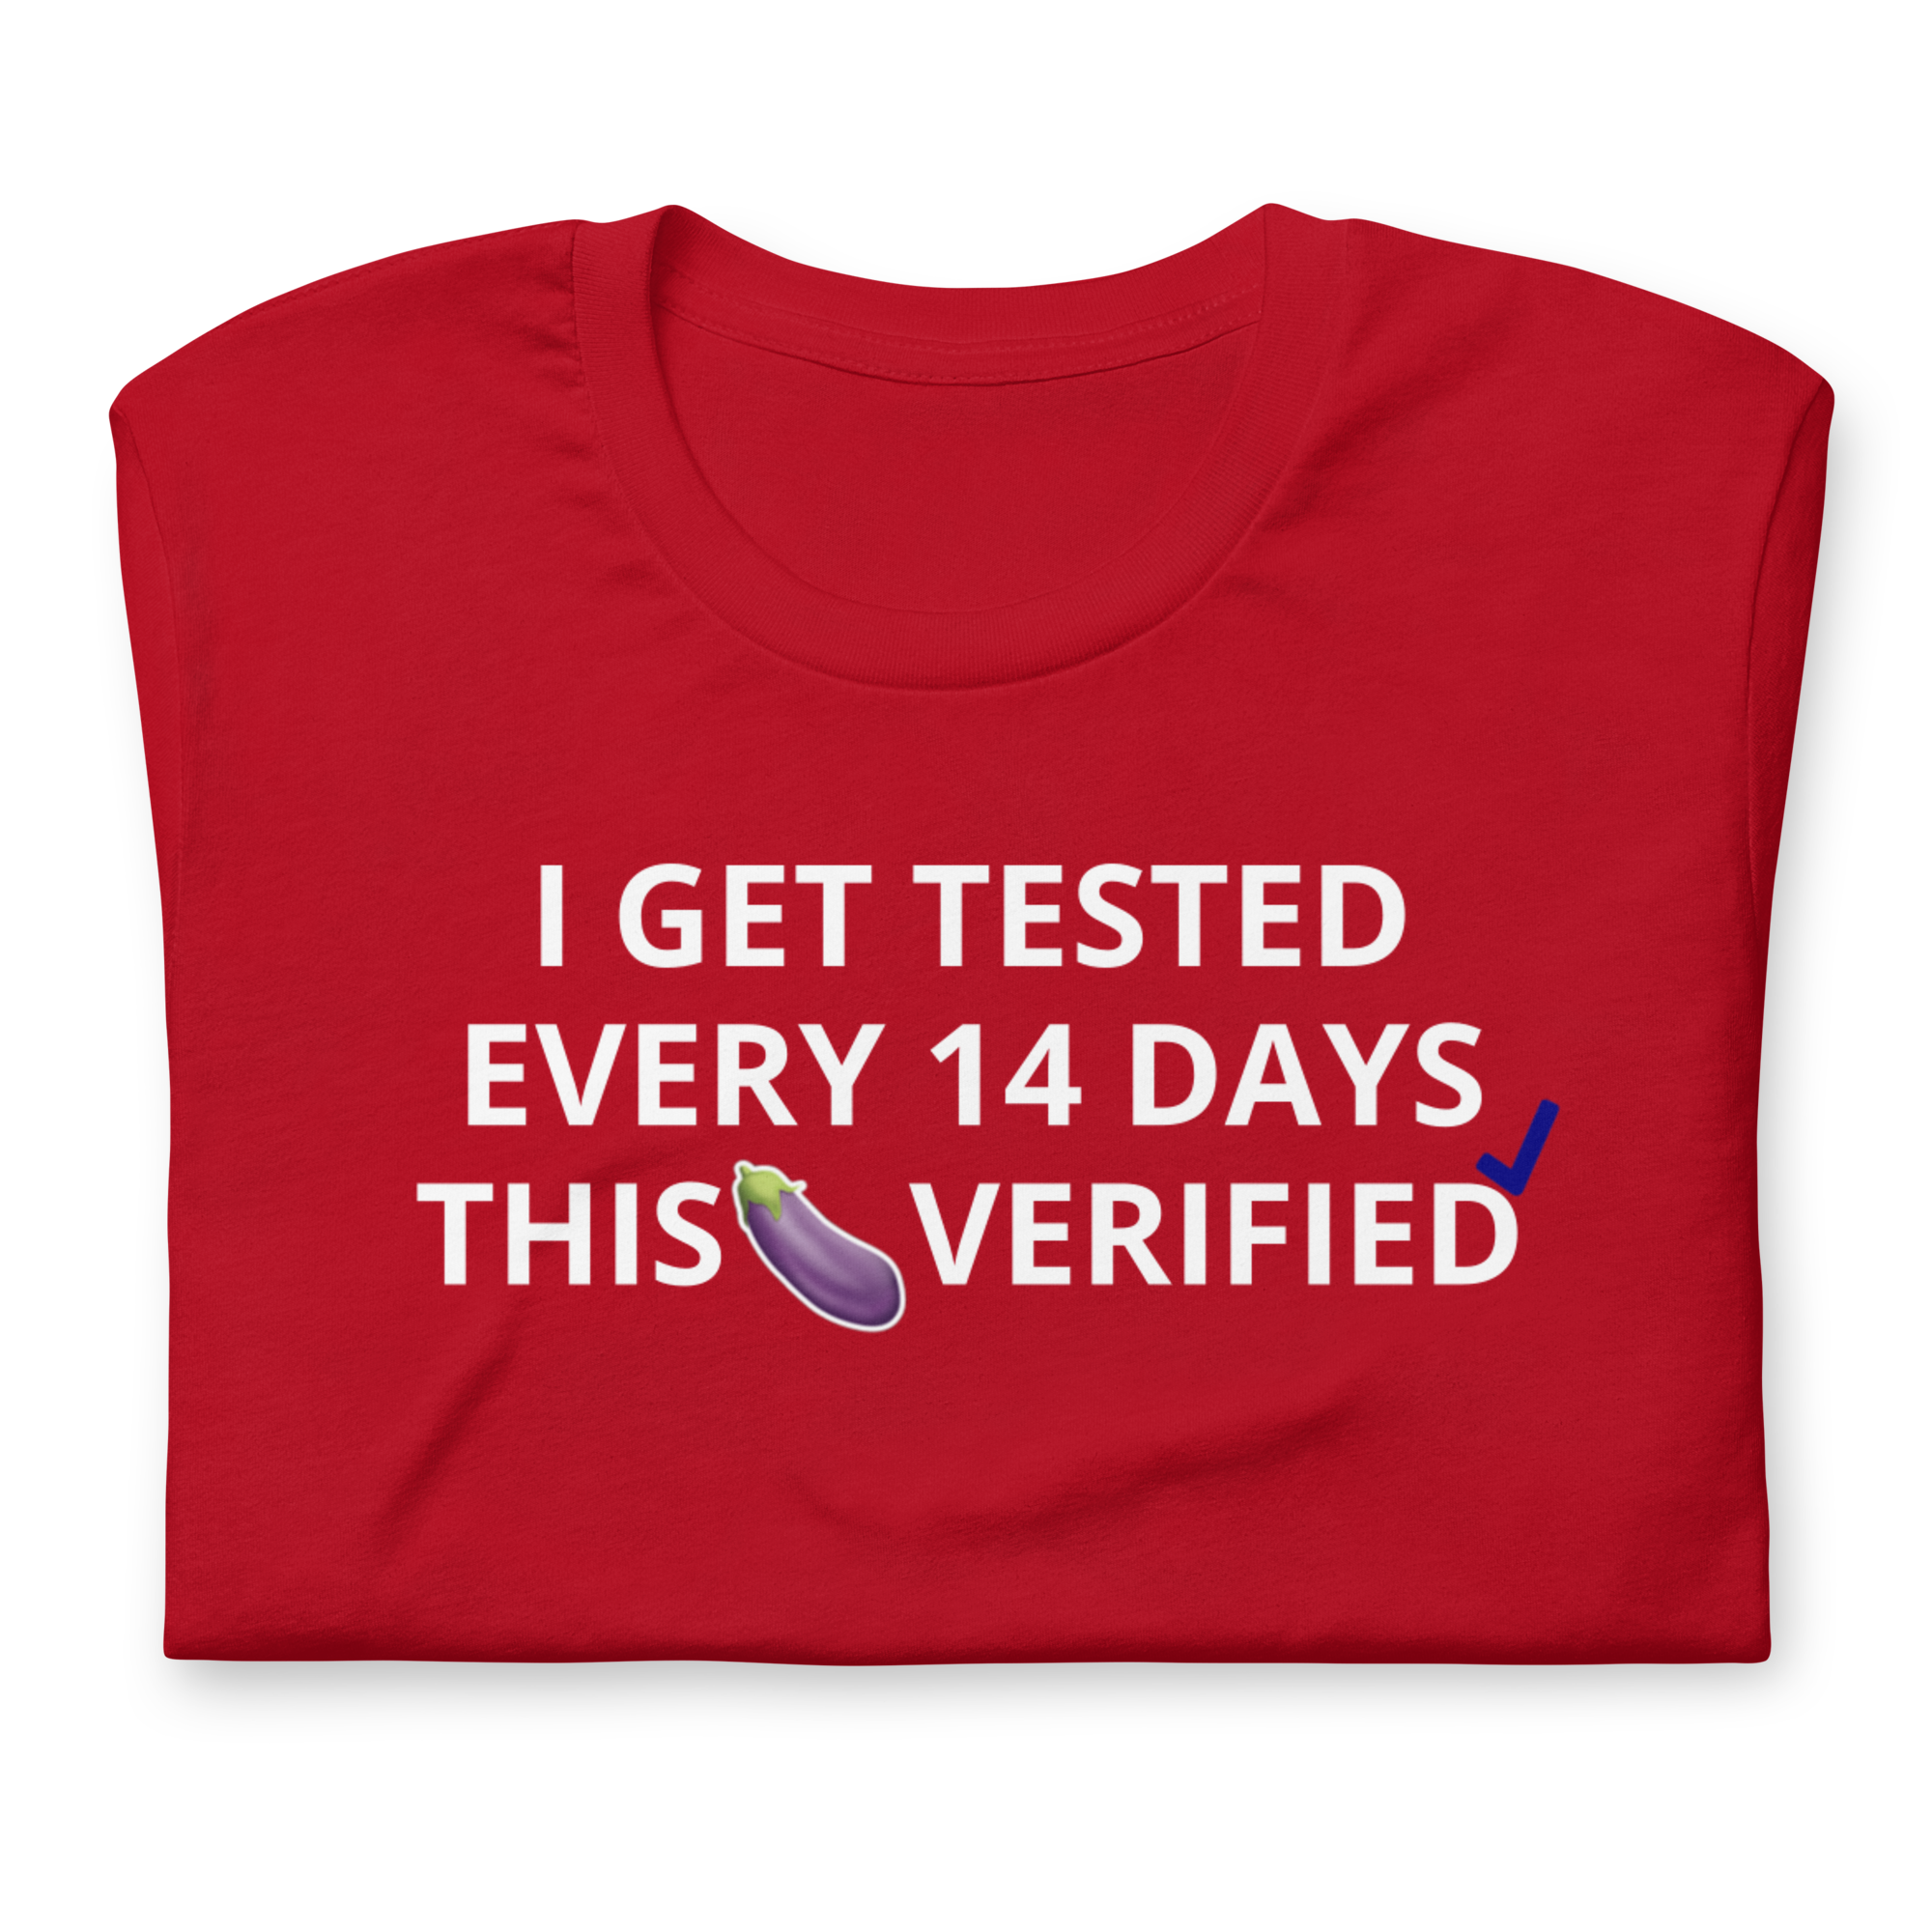 I GET TESTED EVERY 14 DAYS THIS D*** VERIFIED